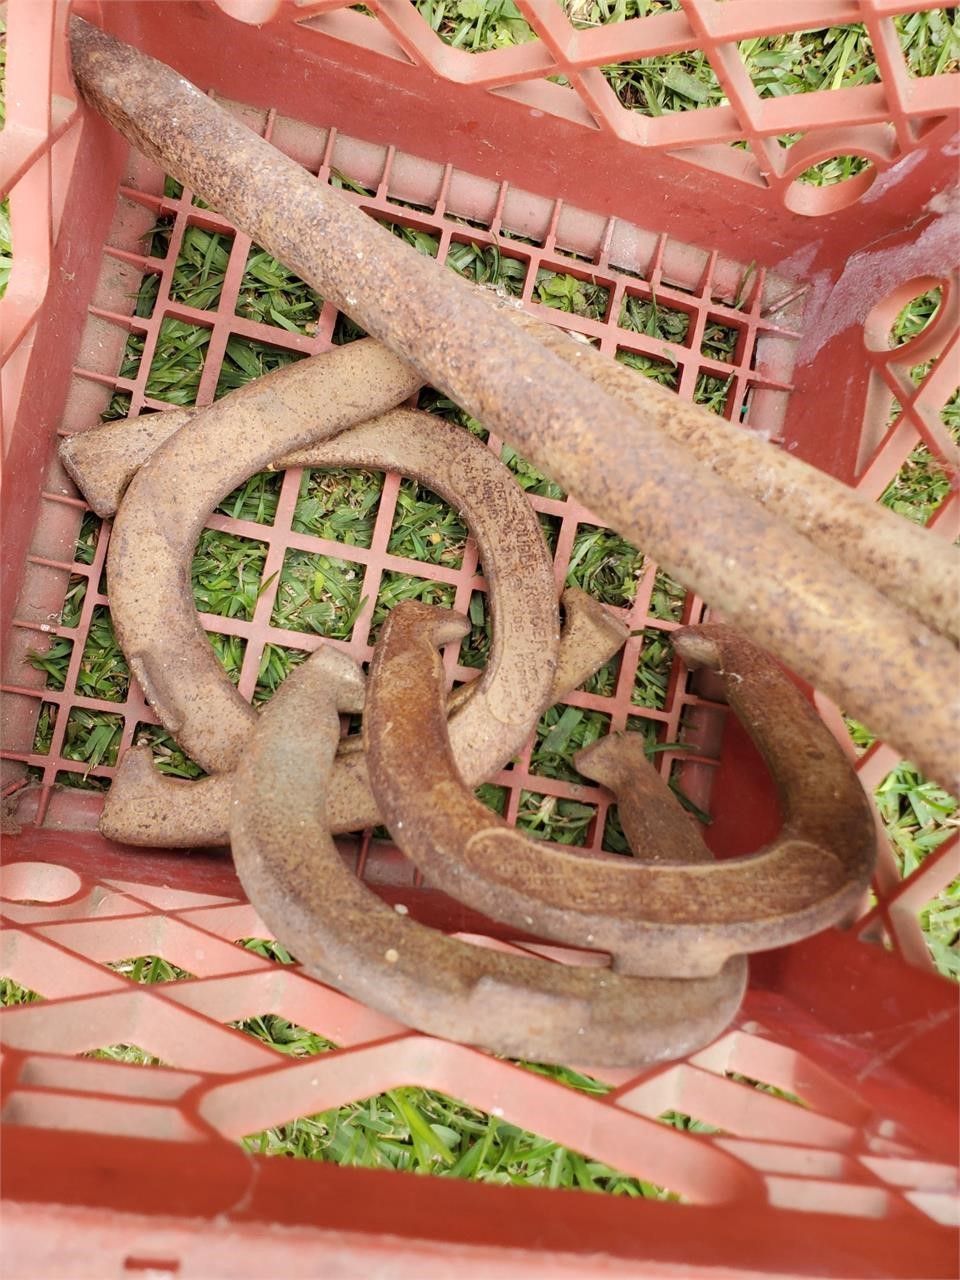 Horseshoes in crate